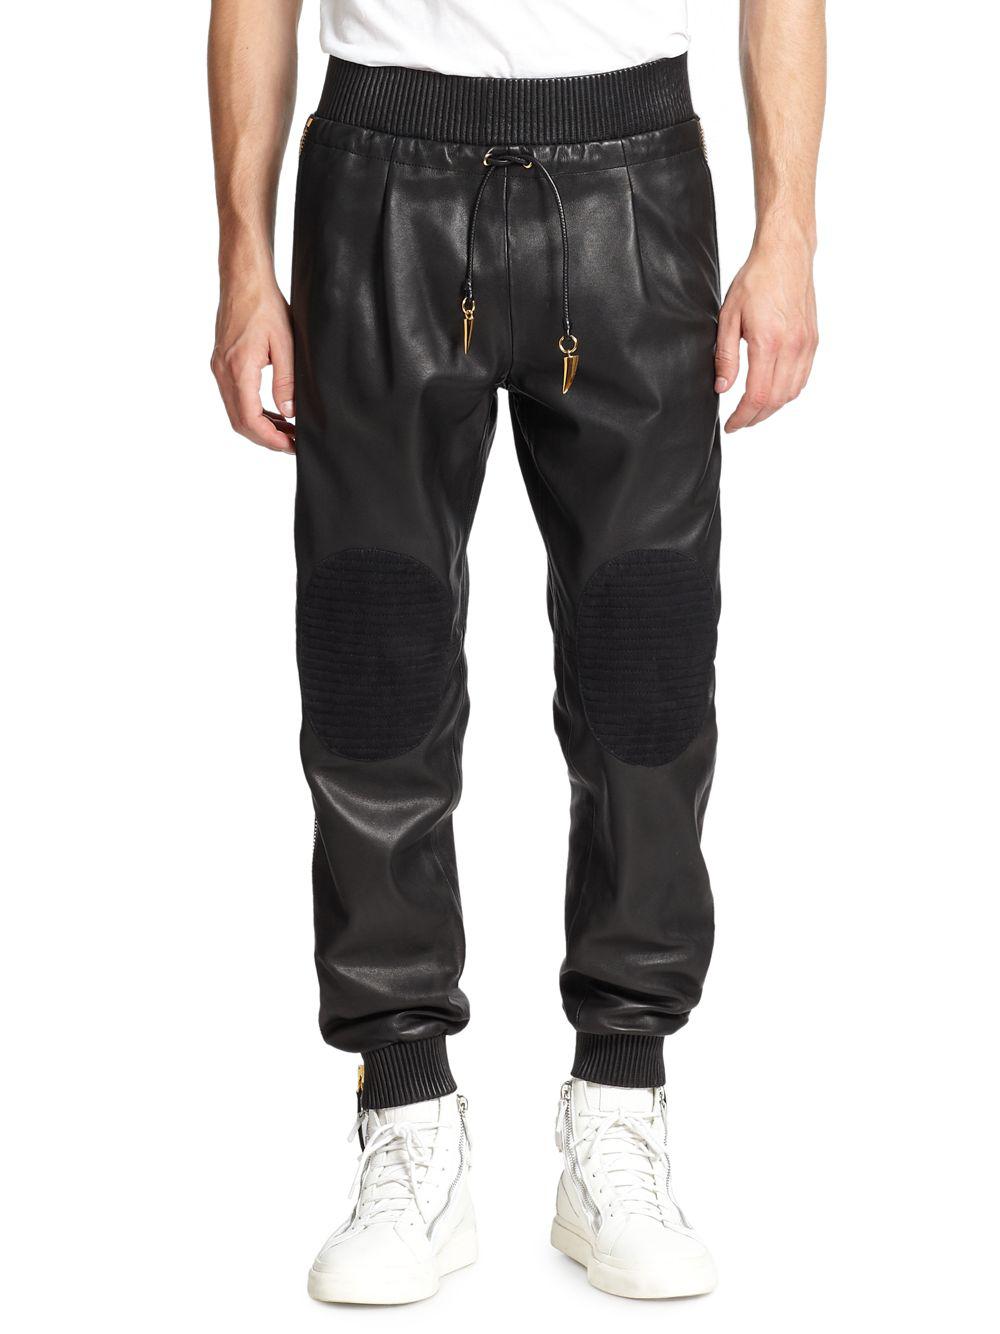 G-Star RAW Leather Pants in Black for Men - Lyst